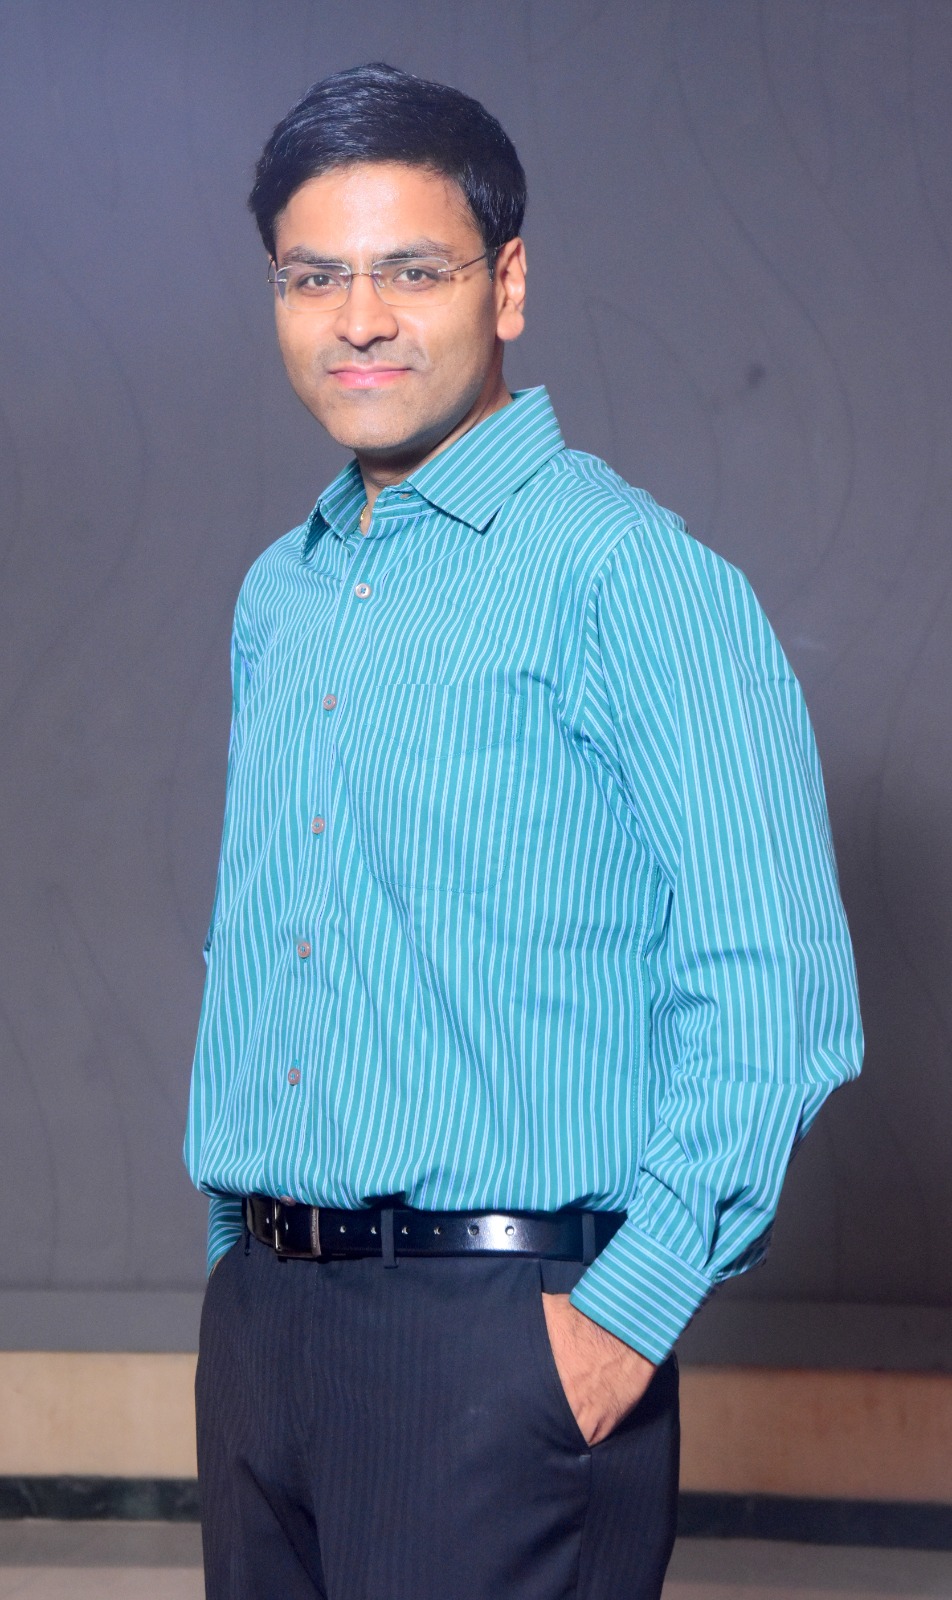 Himanshu Singhal: A Visionary Leader in Marketing, Creative Strategy and Communication